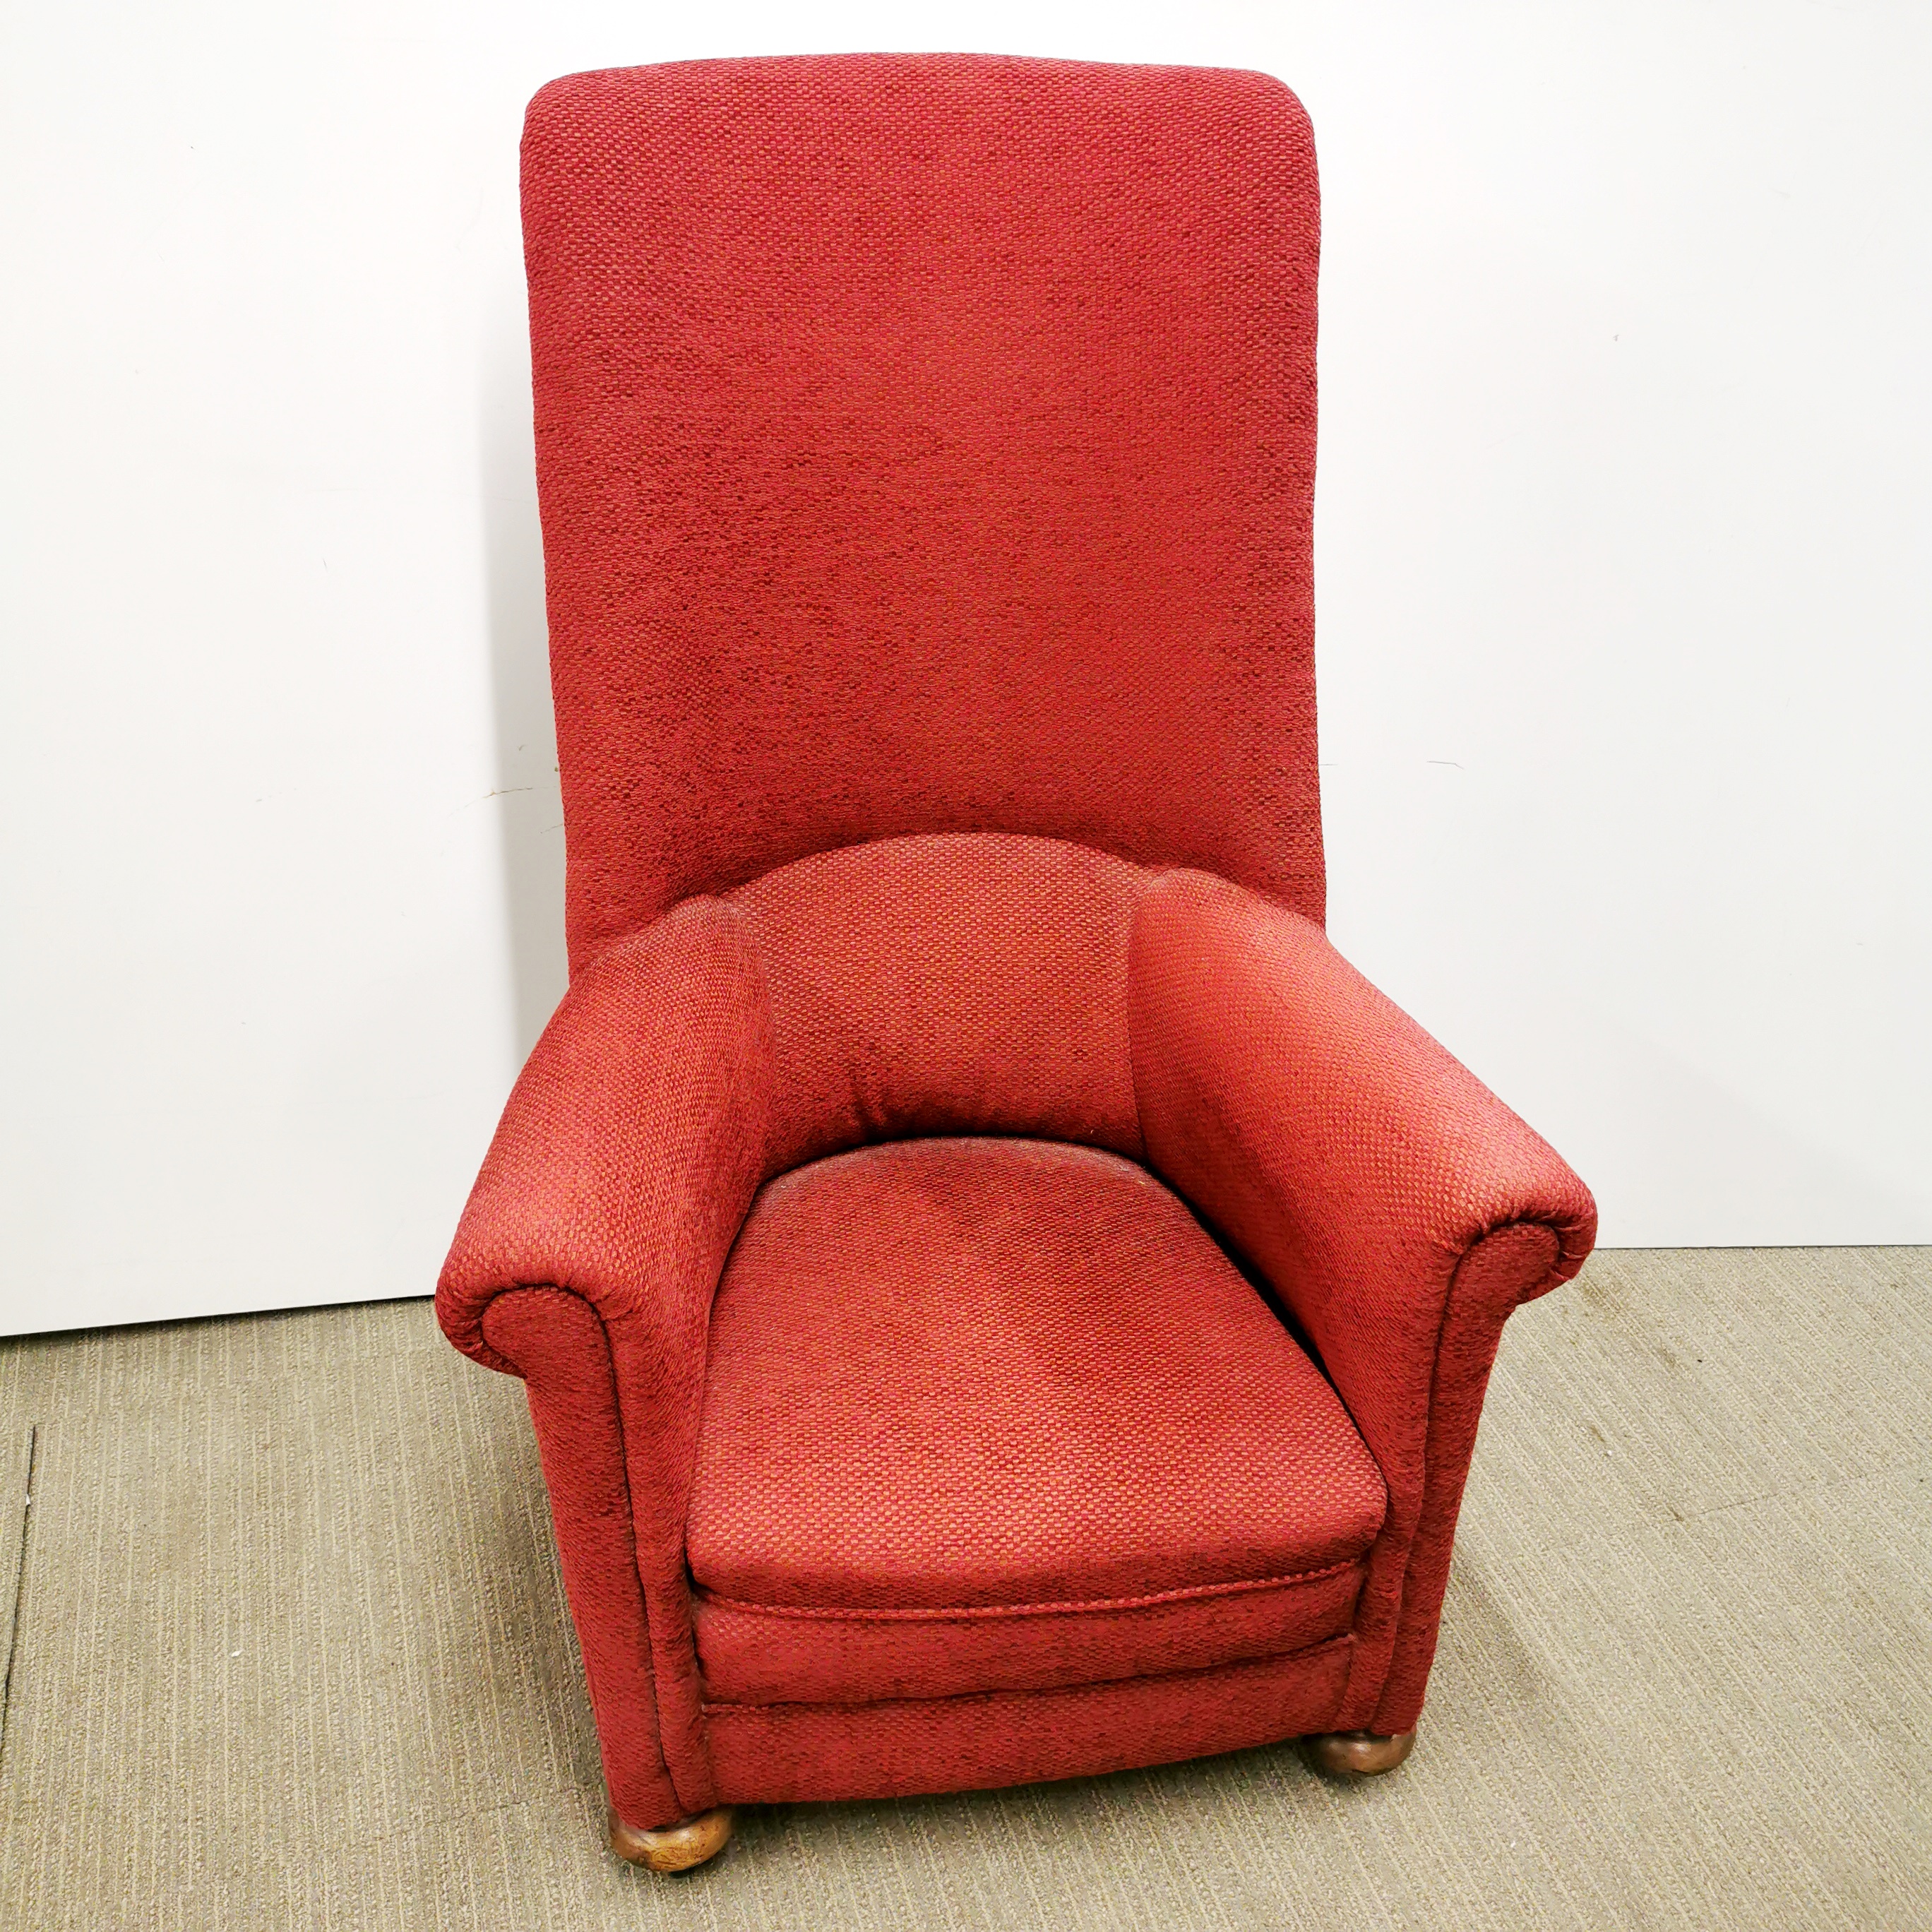 A red upholstered high back armchair.